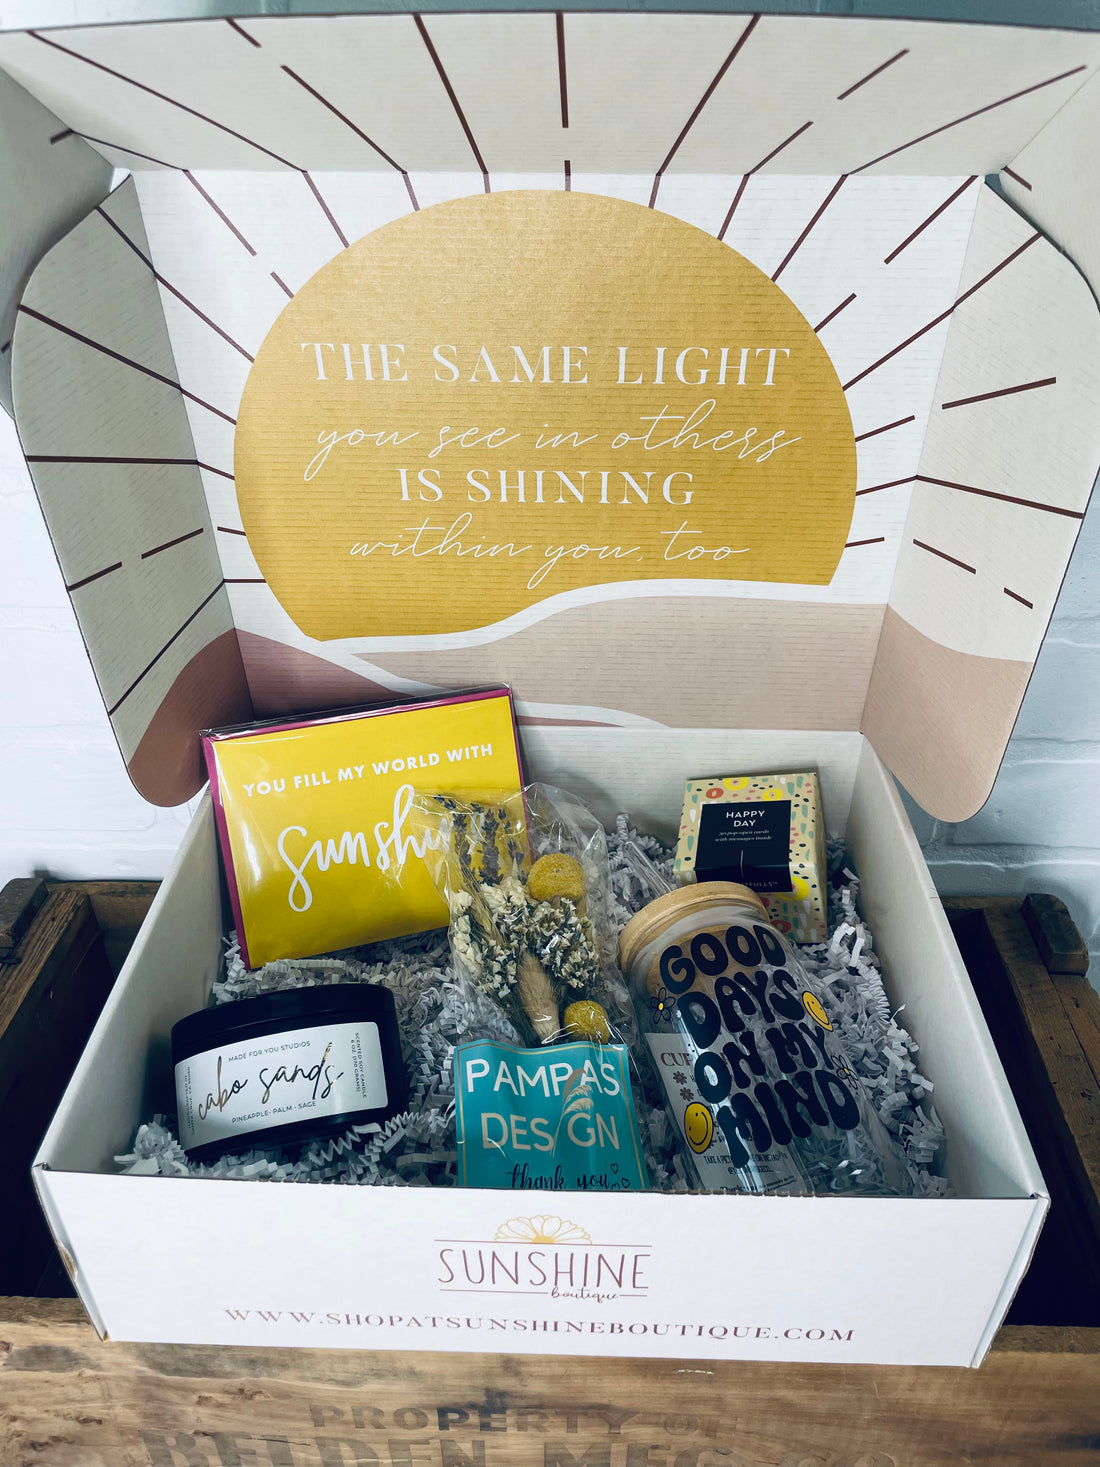 Share the Light Box: Filled with Sunshine